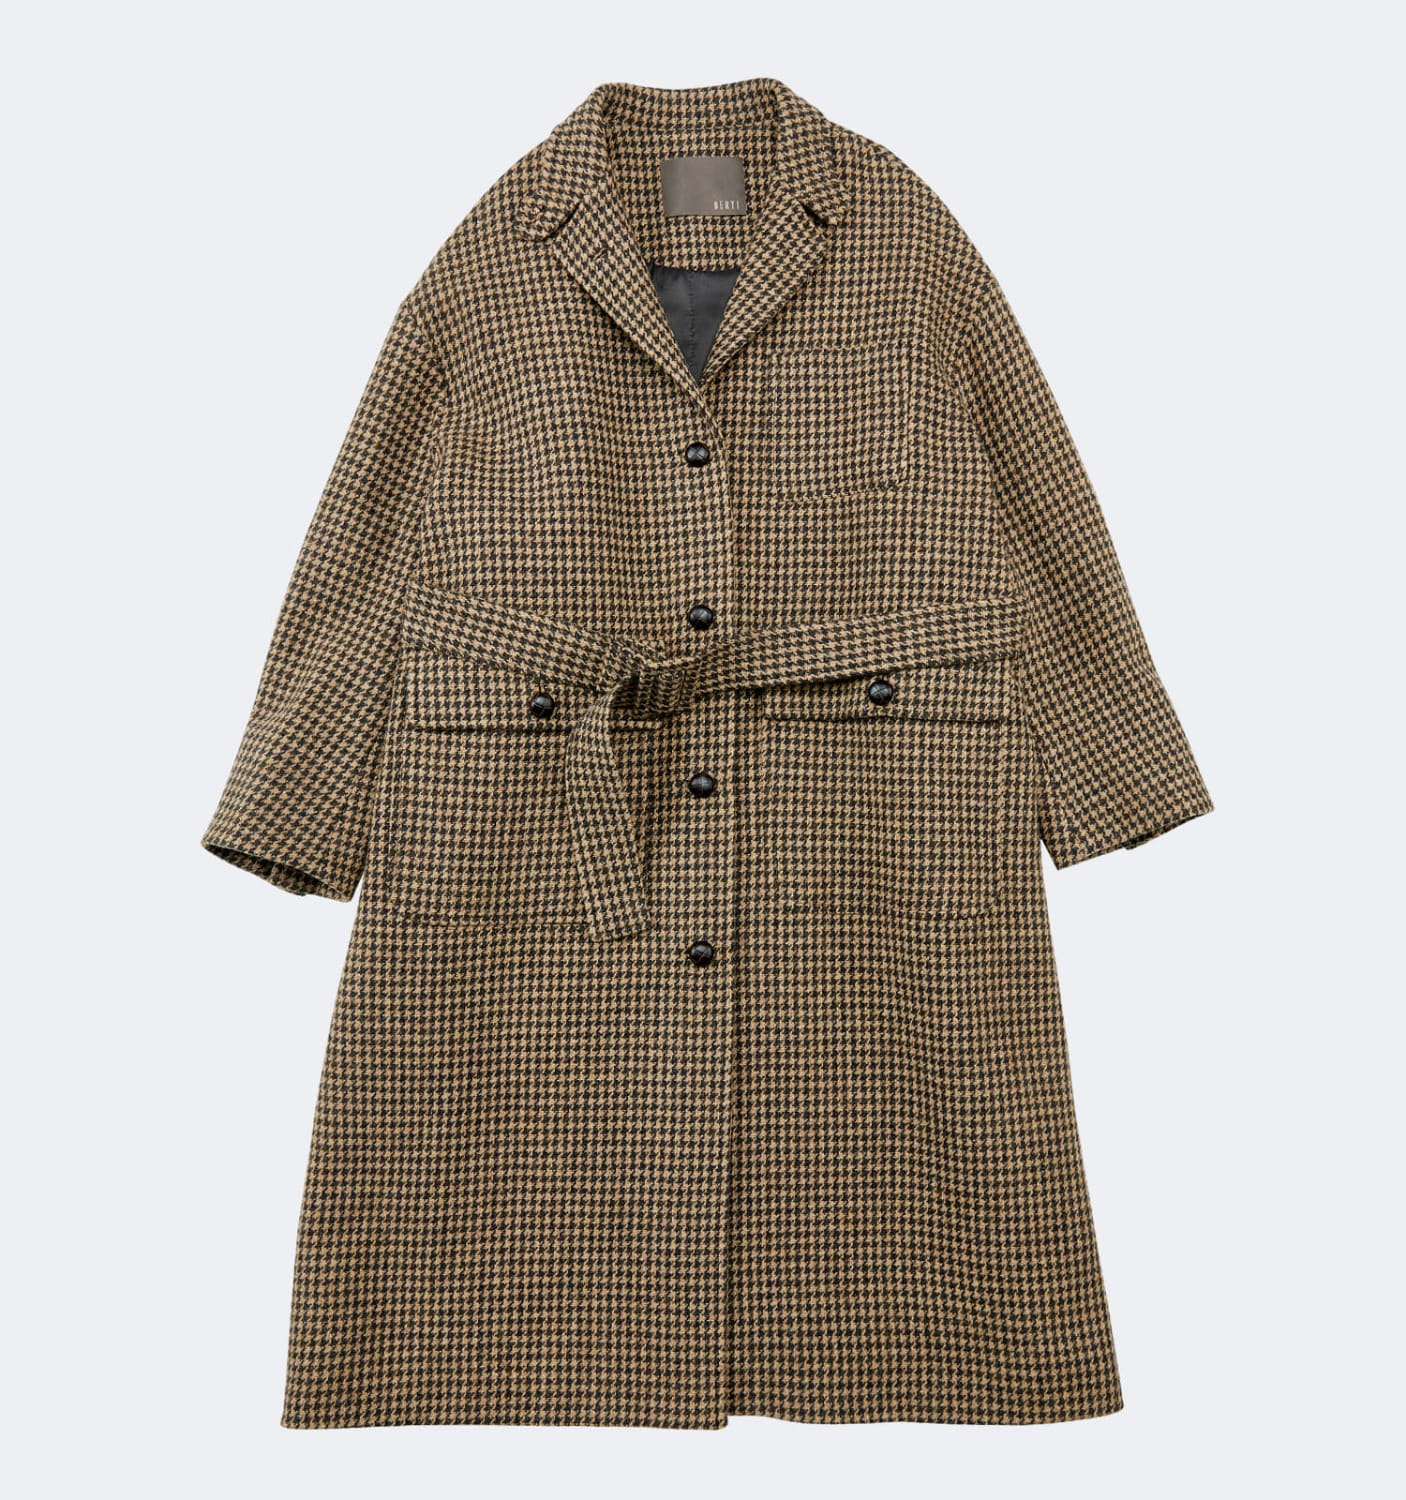 LEATHER BUTTON BELT CHECK WOOL COAT